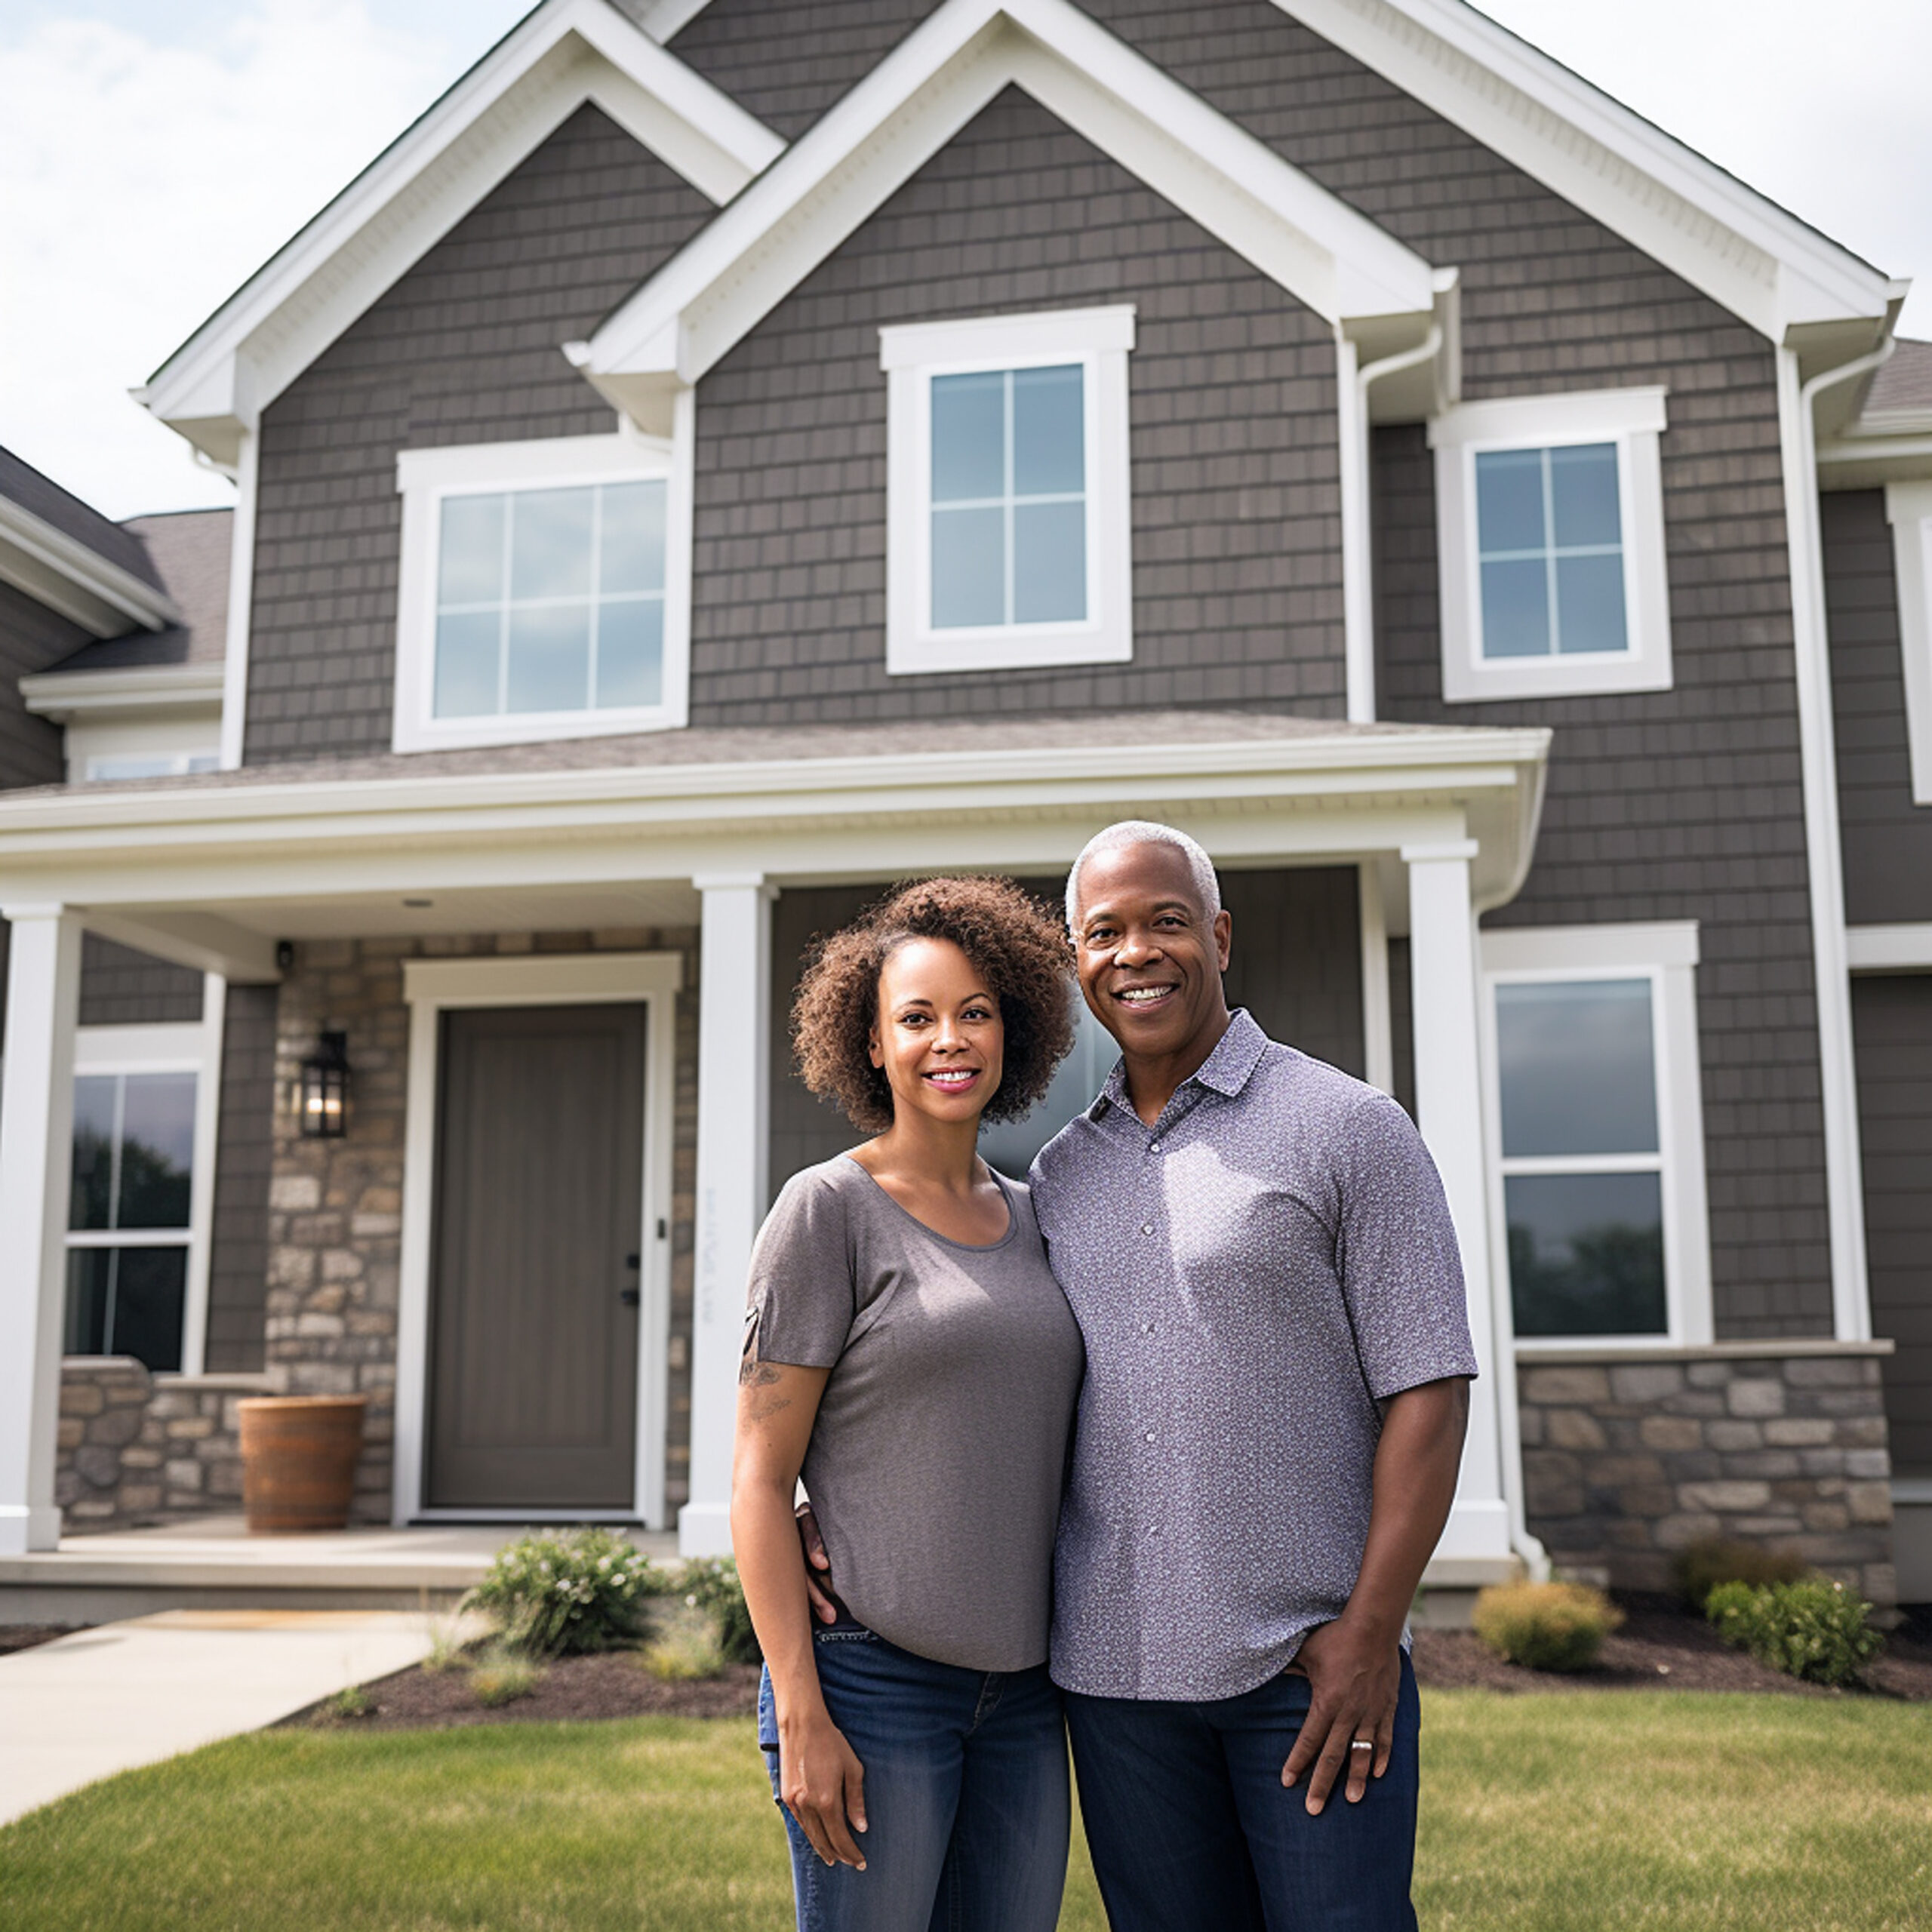 The Pros and Cons of Renting vs. Buying a Home